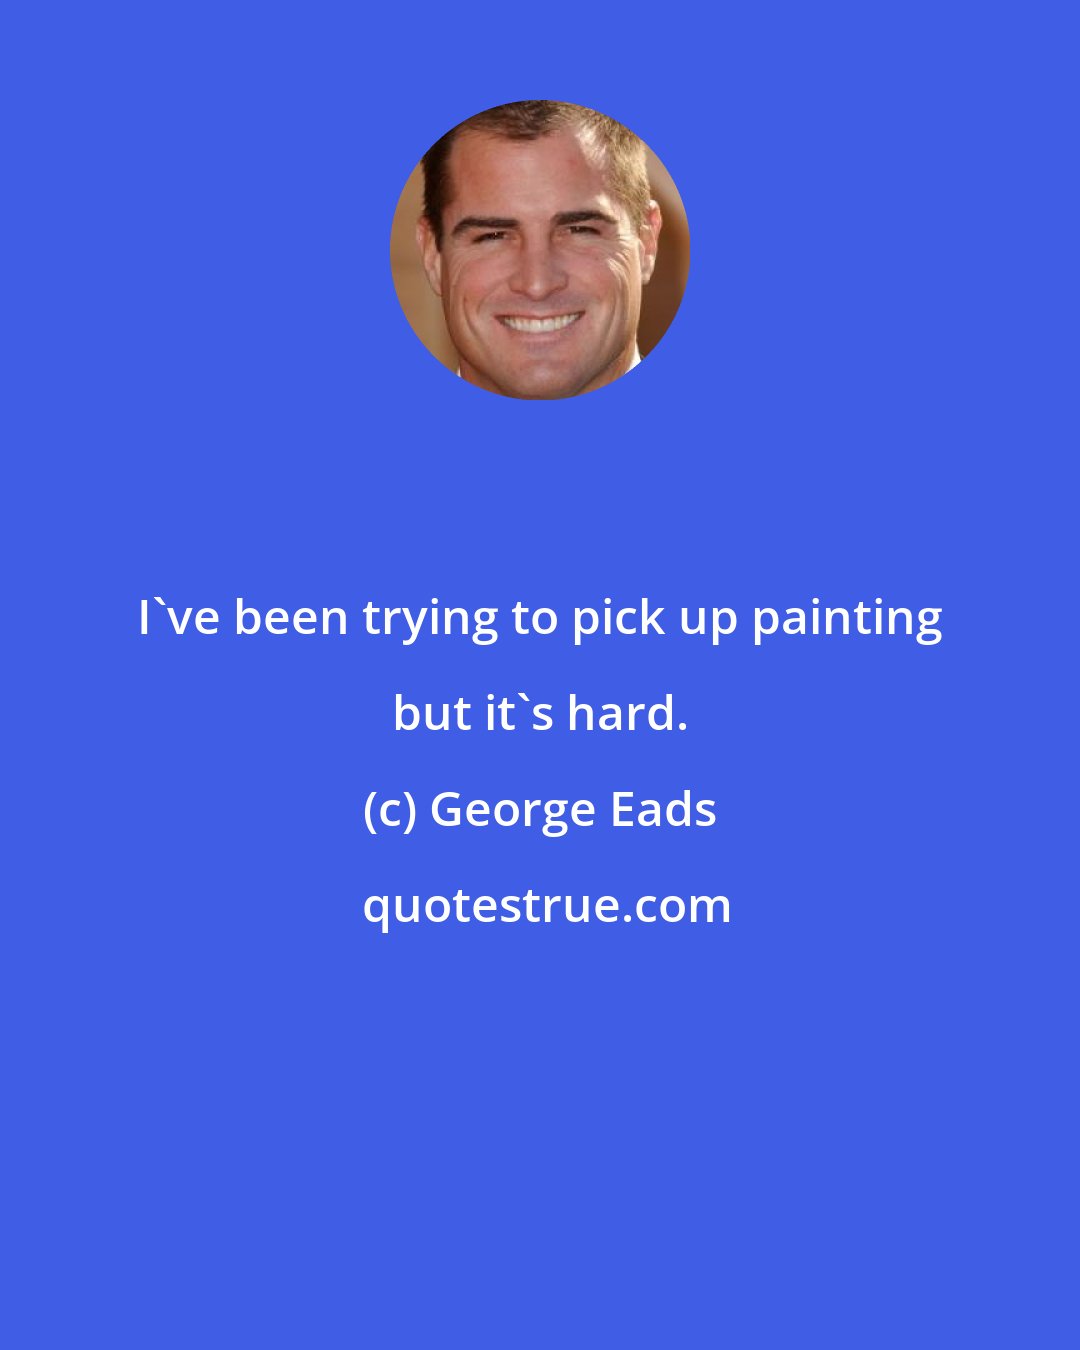 George Eads: I've been trying to pick up painting but it's hard.